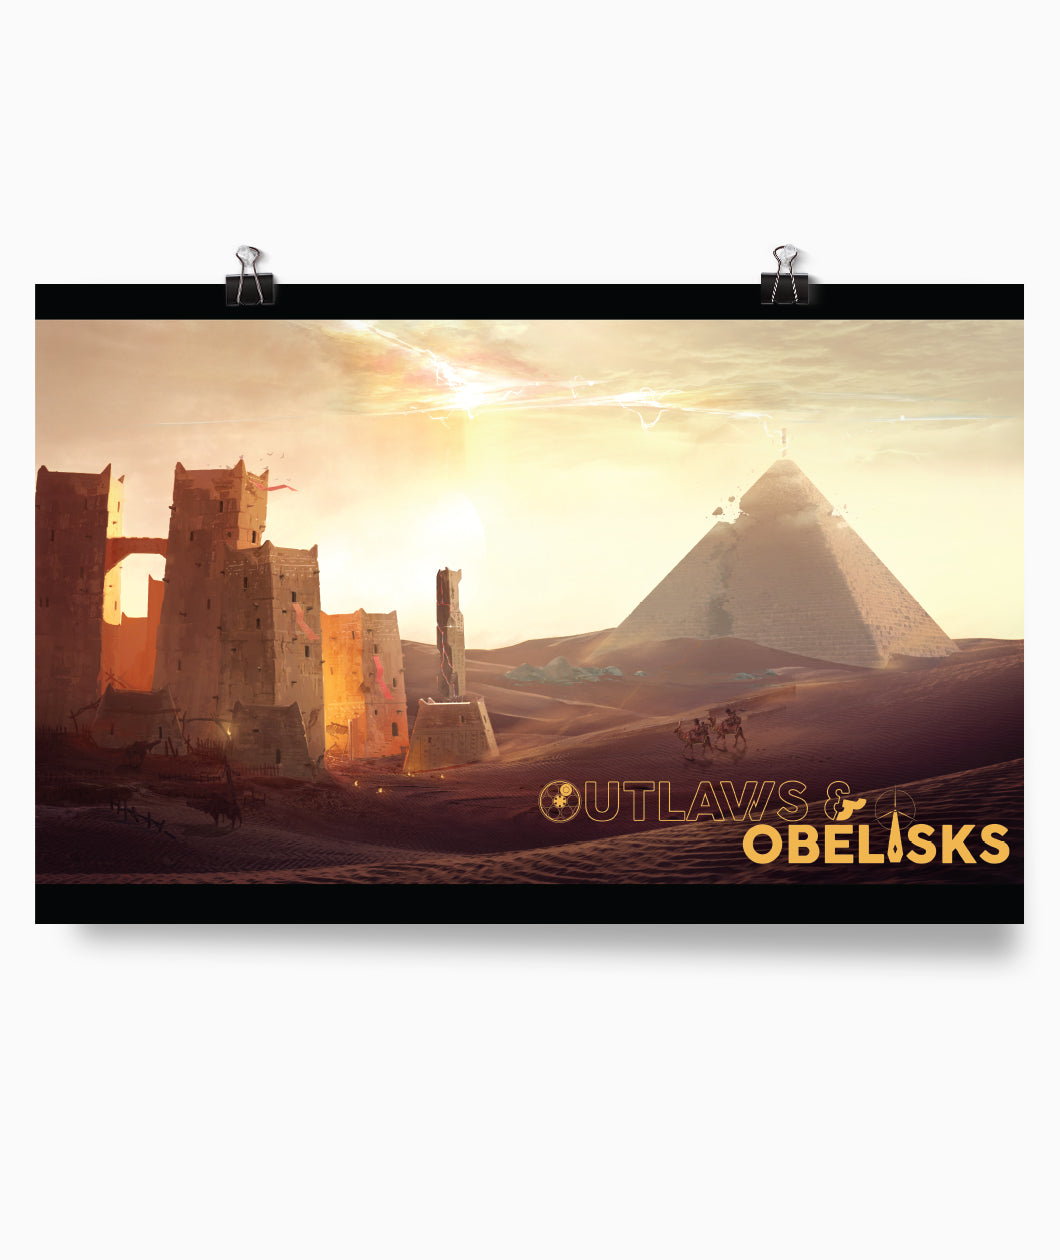 A poster featuring a desert, a pyramid, and old standing buildings. On the poster are the words "Outlaws and Obelisks". From Three Black Halflings. 